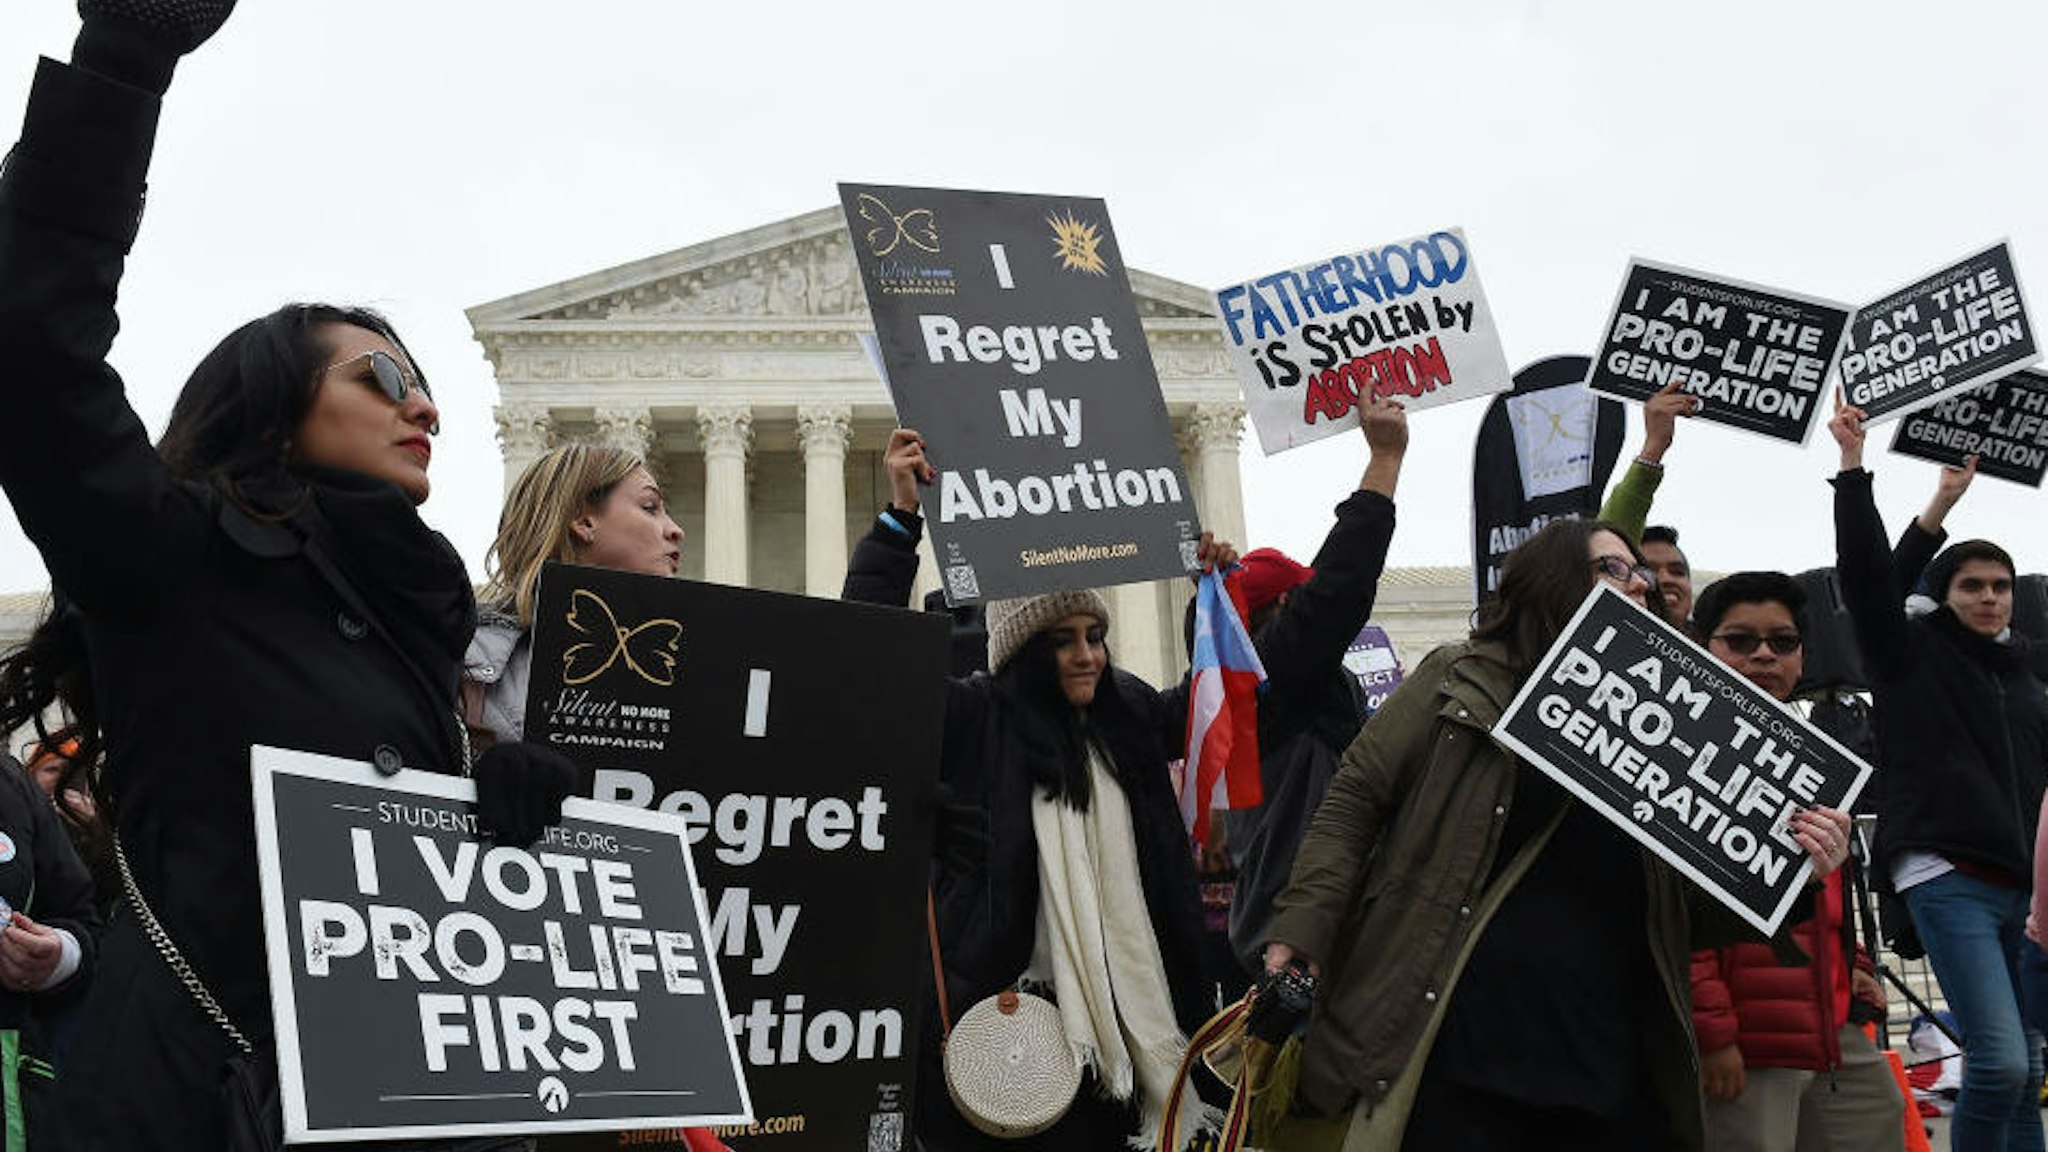 Pro-life activists demonstrate in front of the the US Supreme Court during the 47th annual March for Life on January 24, 2020 in Washington, DC. - Activists gathered in the nation's capital for the annual event to mark the anniversary of the Supreme Court Roe v. Wade ruling that legalized abortion in 1973.